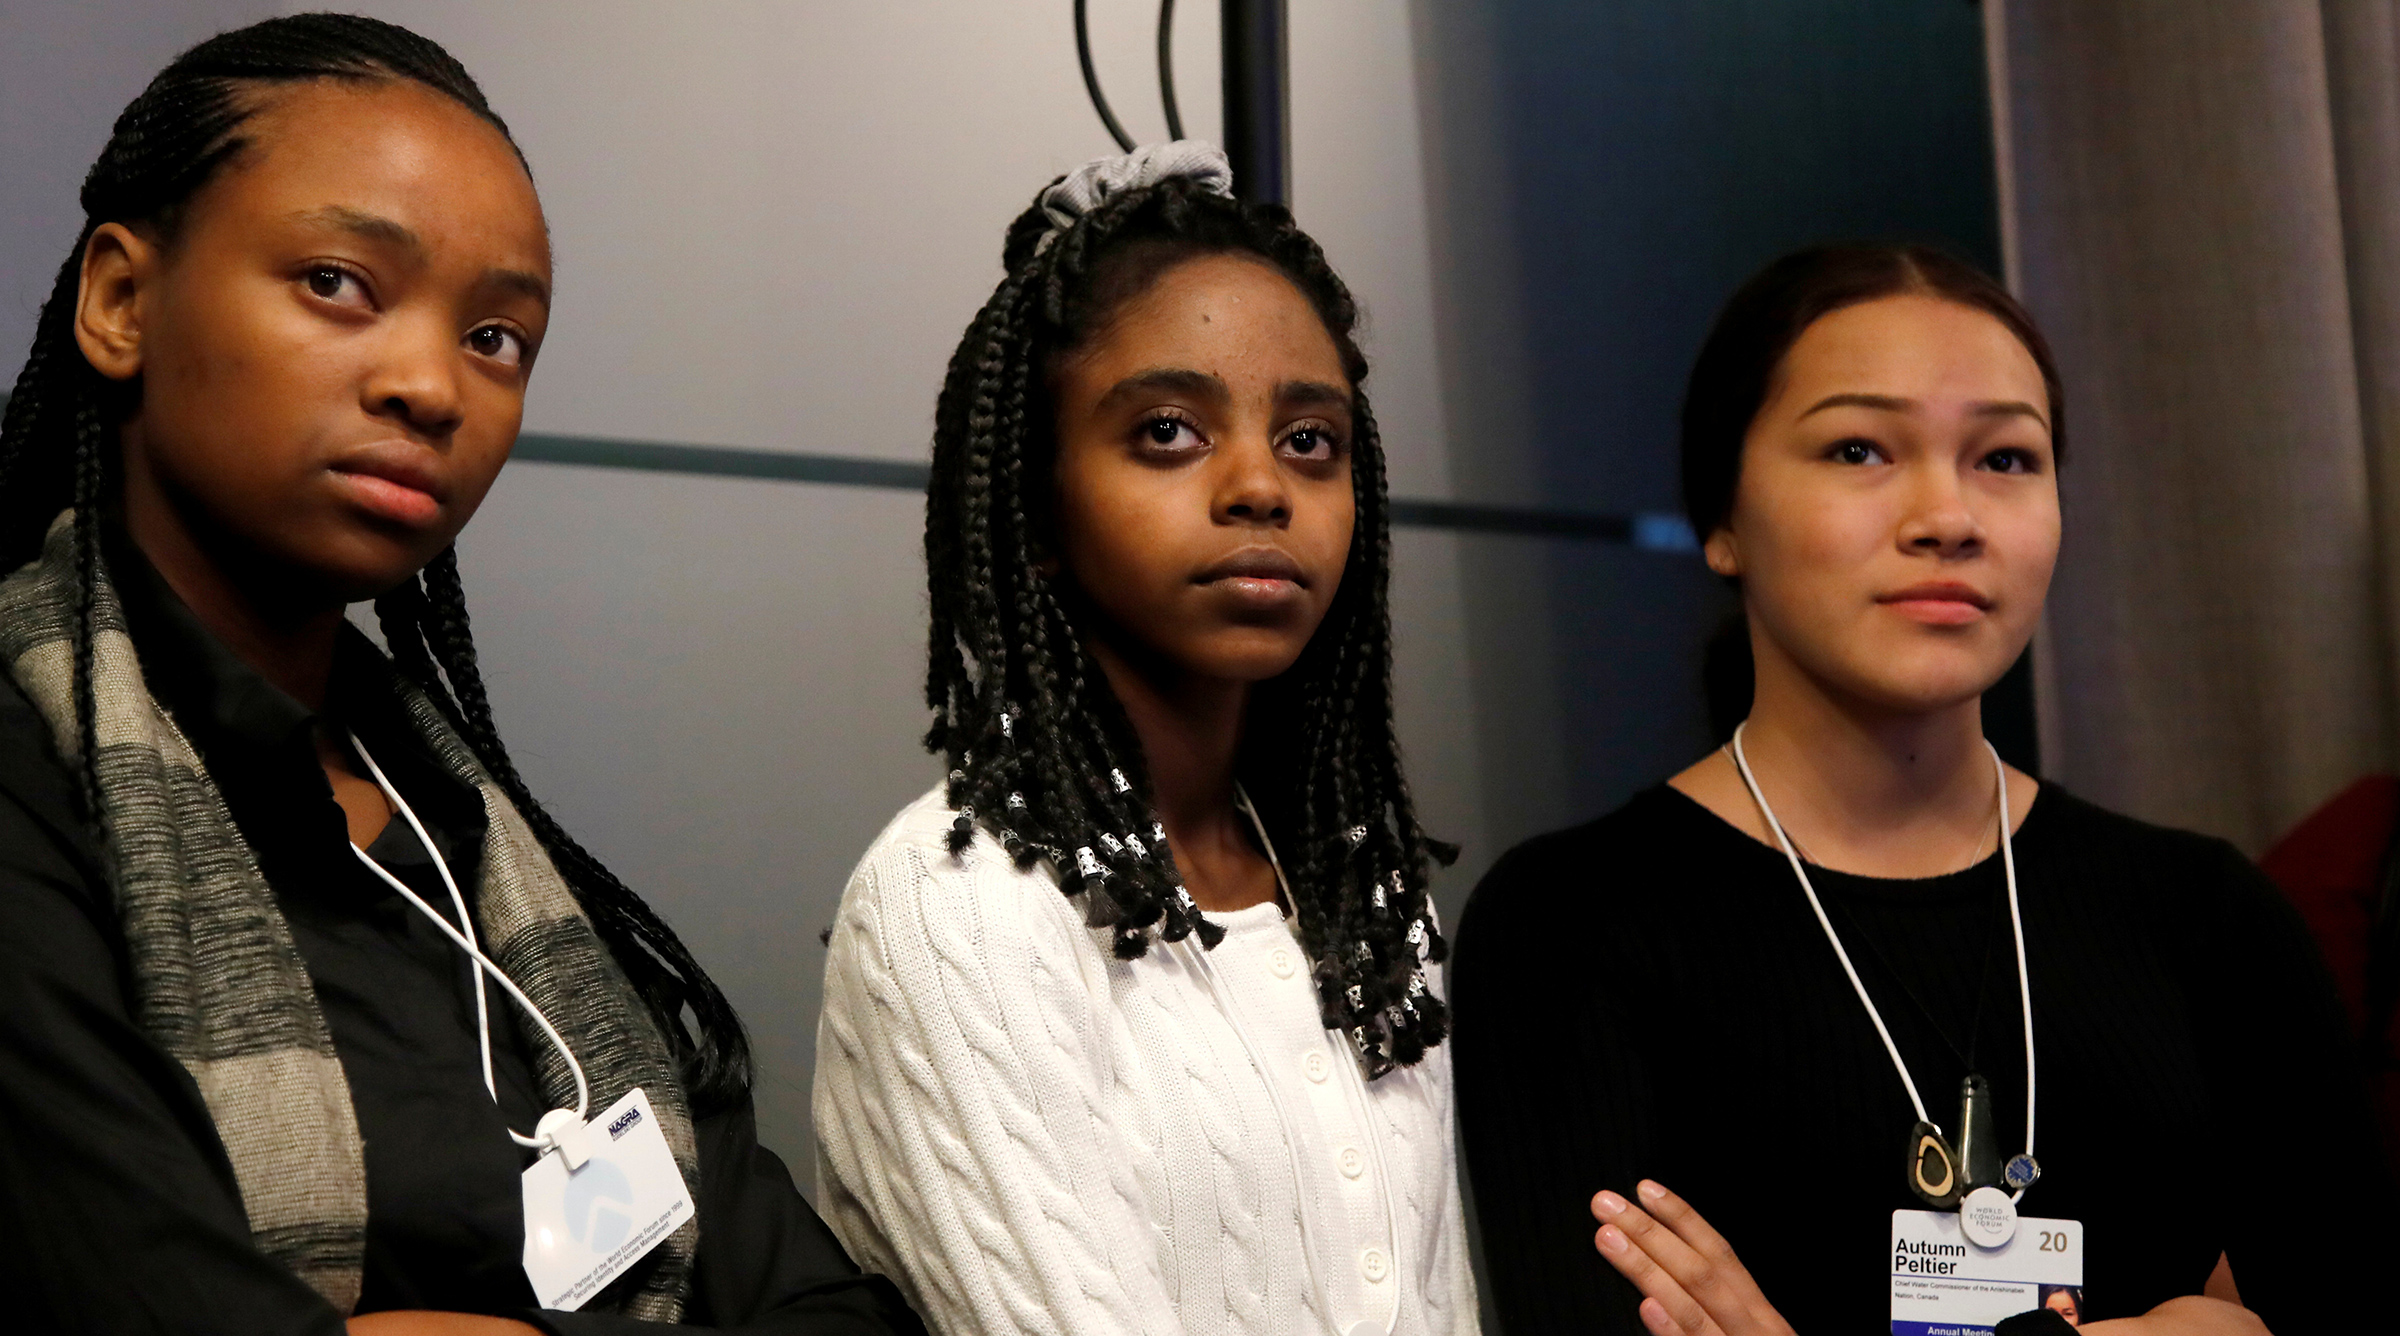 Naomi Wadler, center, takes part in a forum with Ayakha Melithafa and Autumn Peltier during the World Economic Forum in Davos, Switzerland Jan. 20, 2020. (Arnd Wiegmann—Reuters)